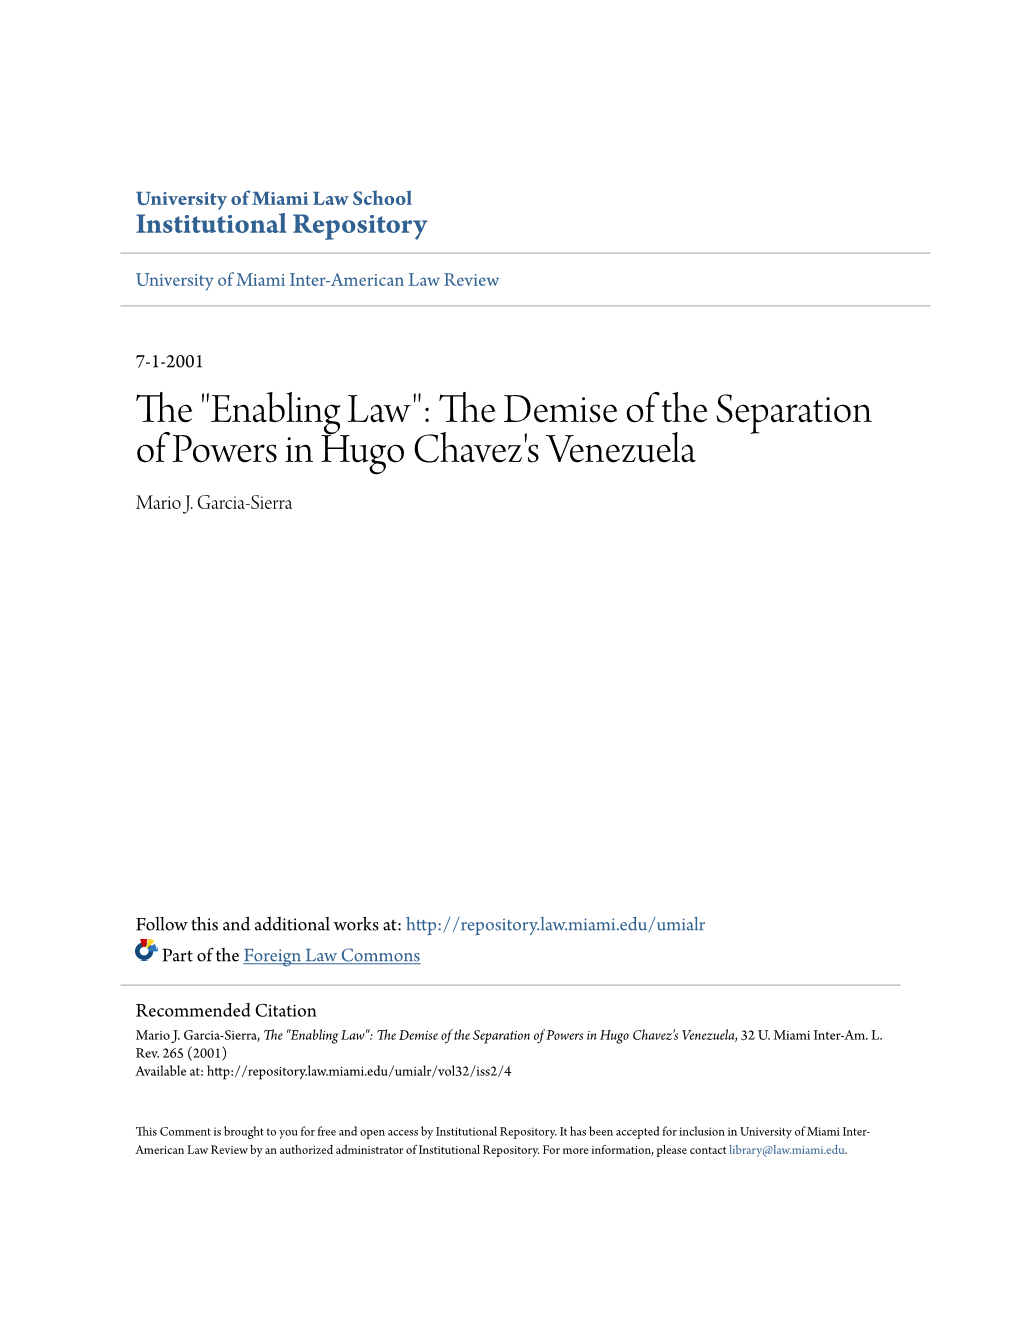 The "Enabling Law": the Demise of the Separation of Powers in Hugo Chavez's Venezuela, 32 U